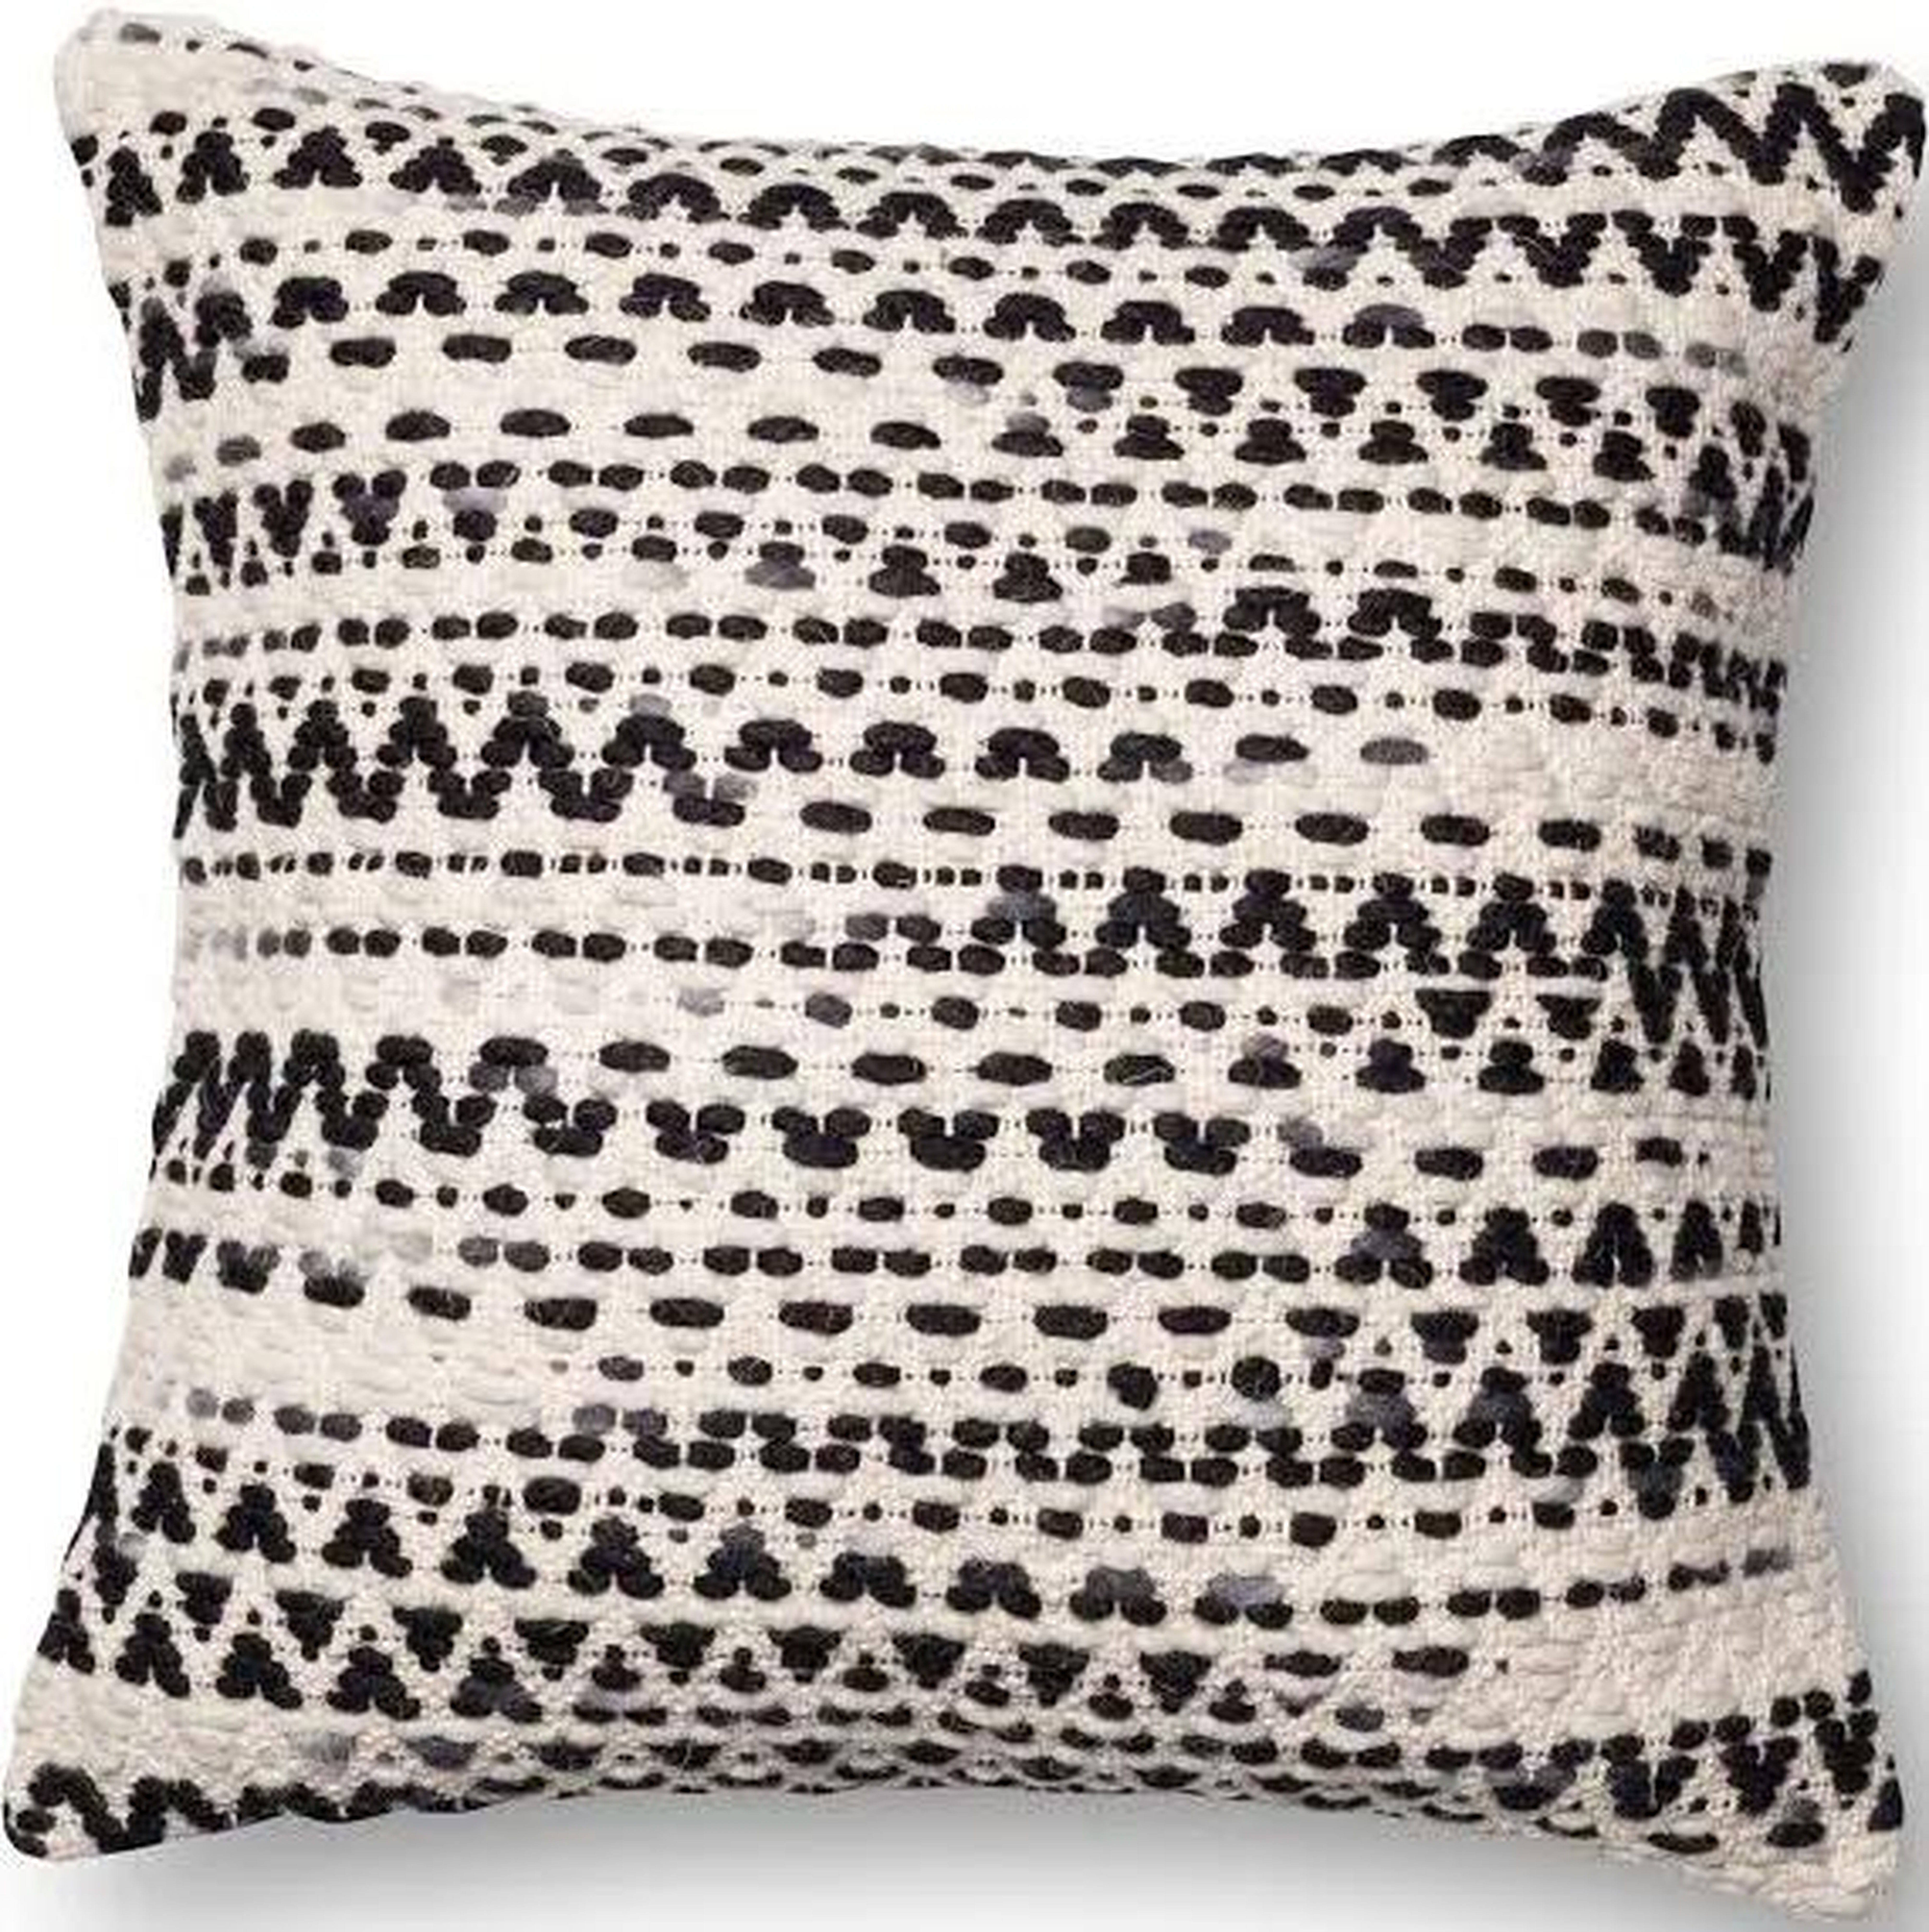 Patterned Throw Pillow, 22" x 22", Black & Ivory - Loma Threads